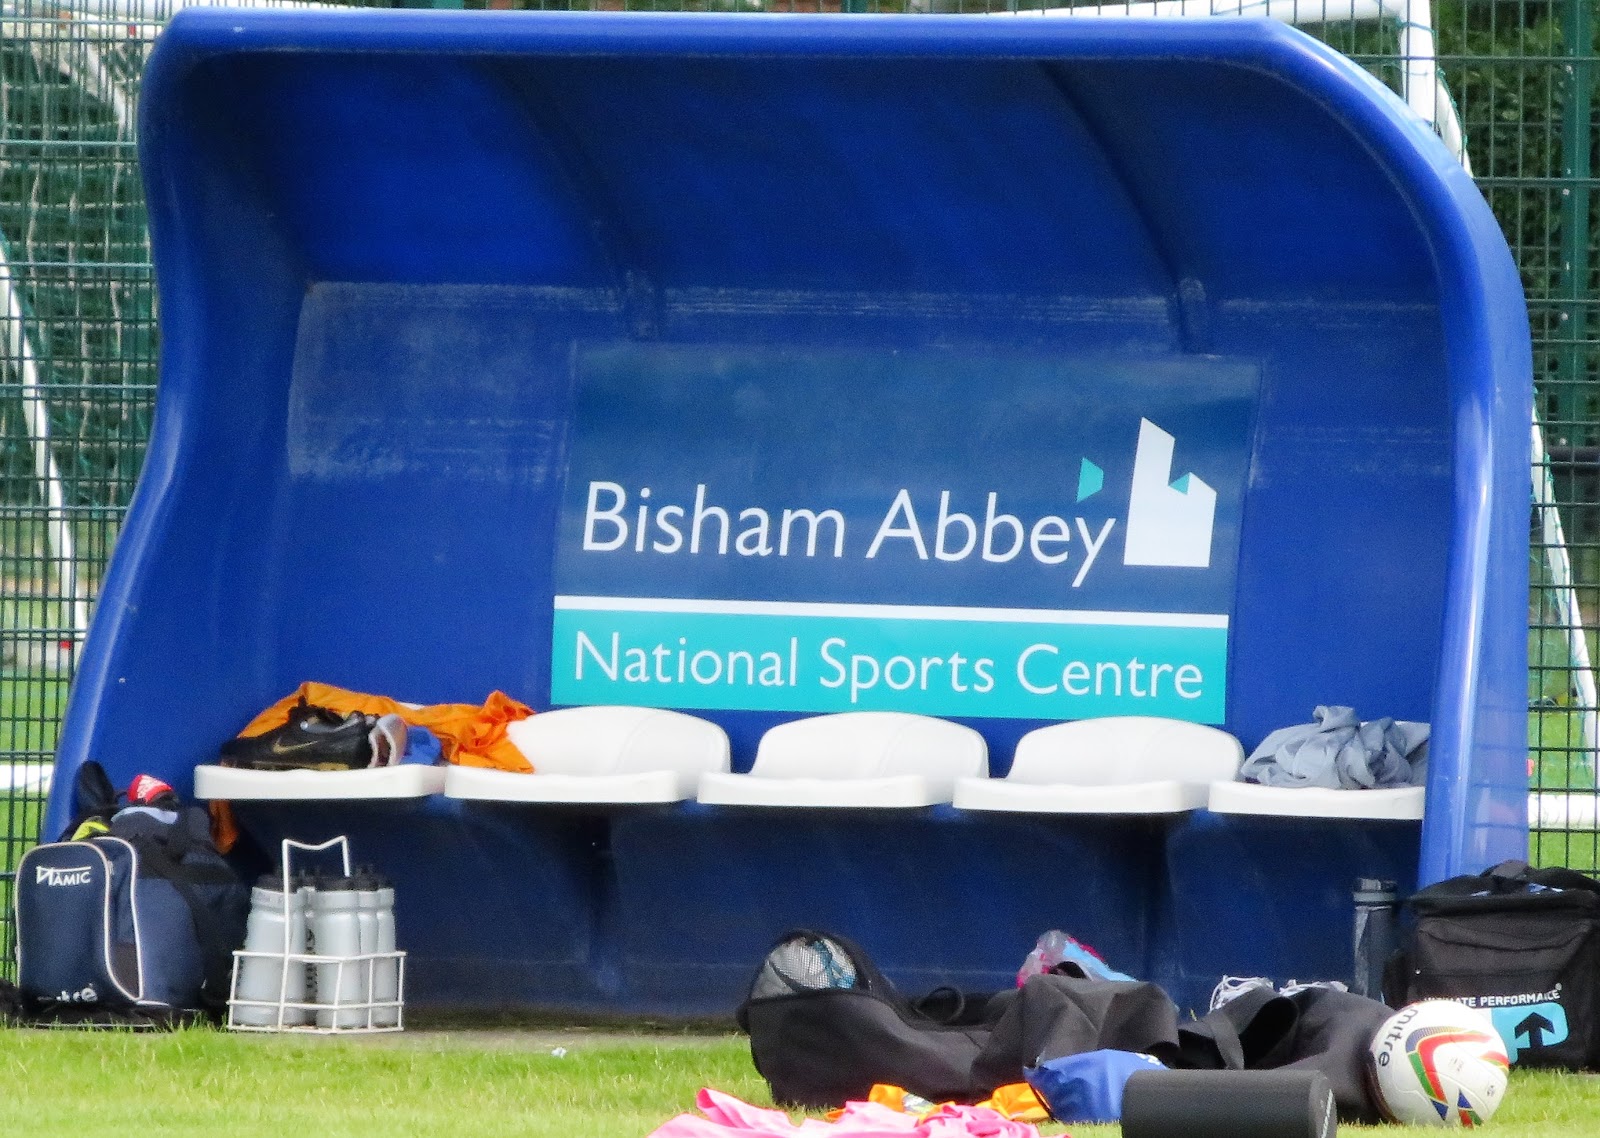 The Wycombe Wanderer: Bisham Abbey National Sports Centre